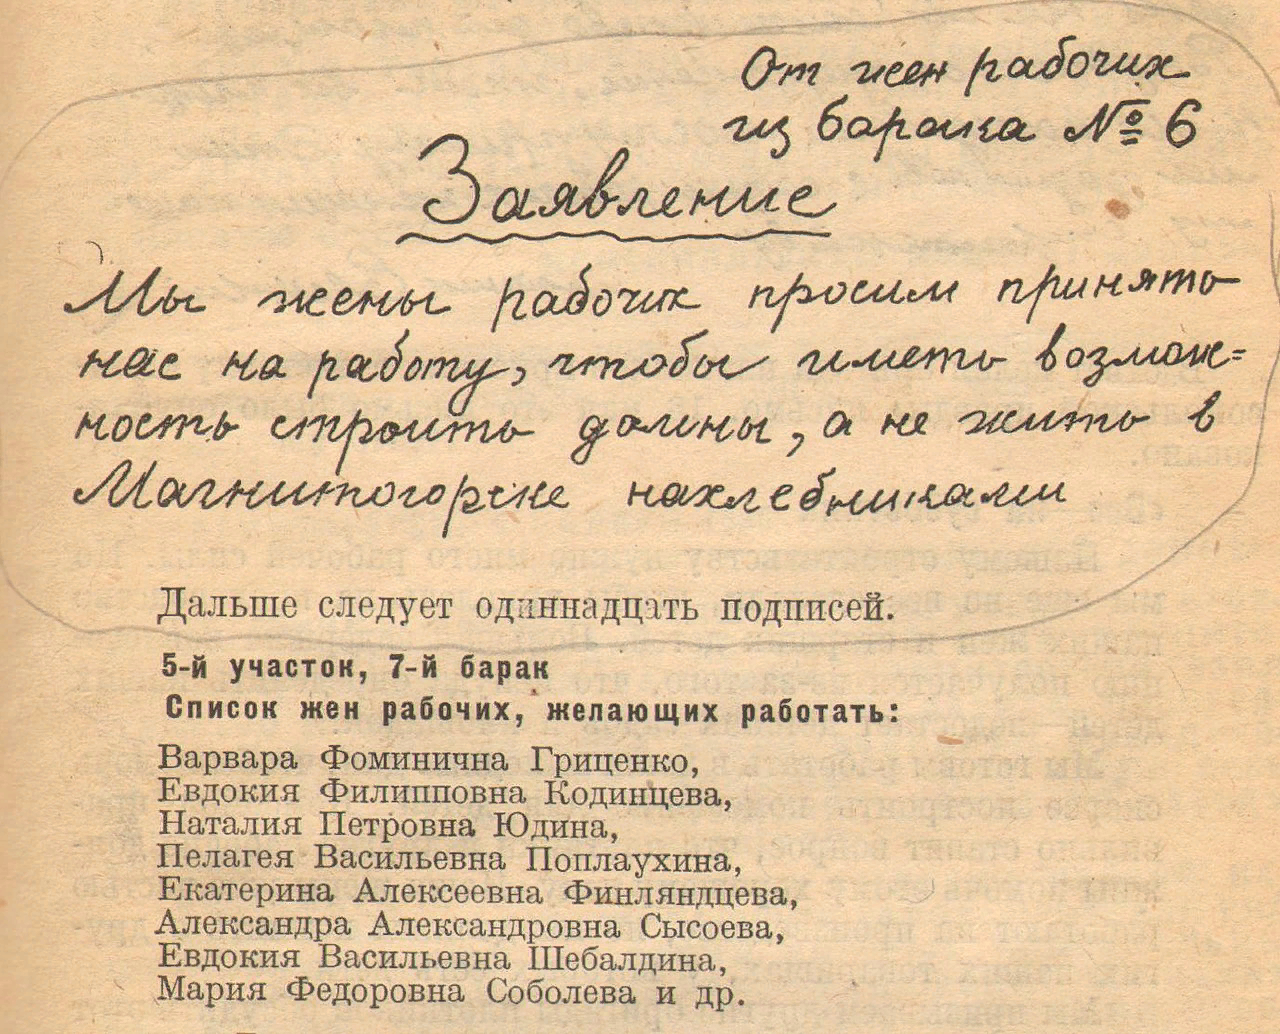 Statement of workers' wives. - Magnitogorsk, Magnitogorsk history club, Past, archive, Female, Work, Childhood memories, Women